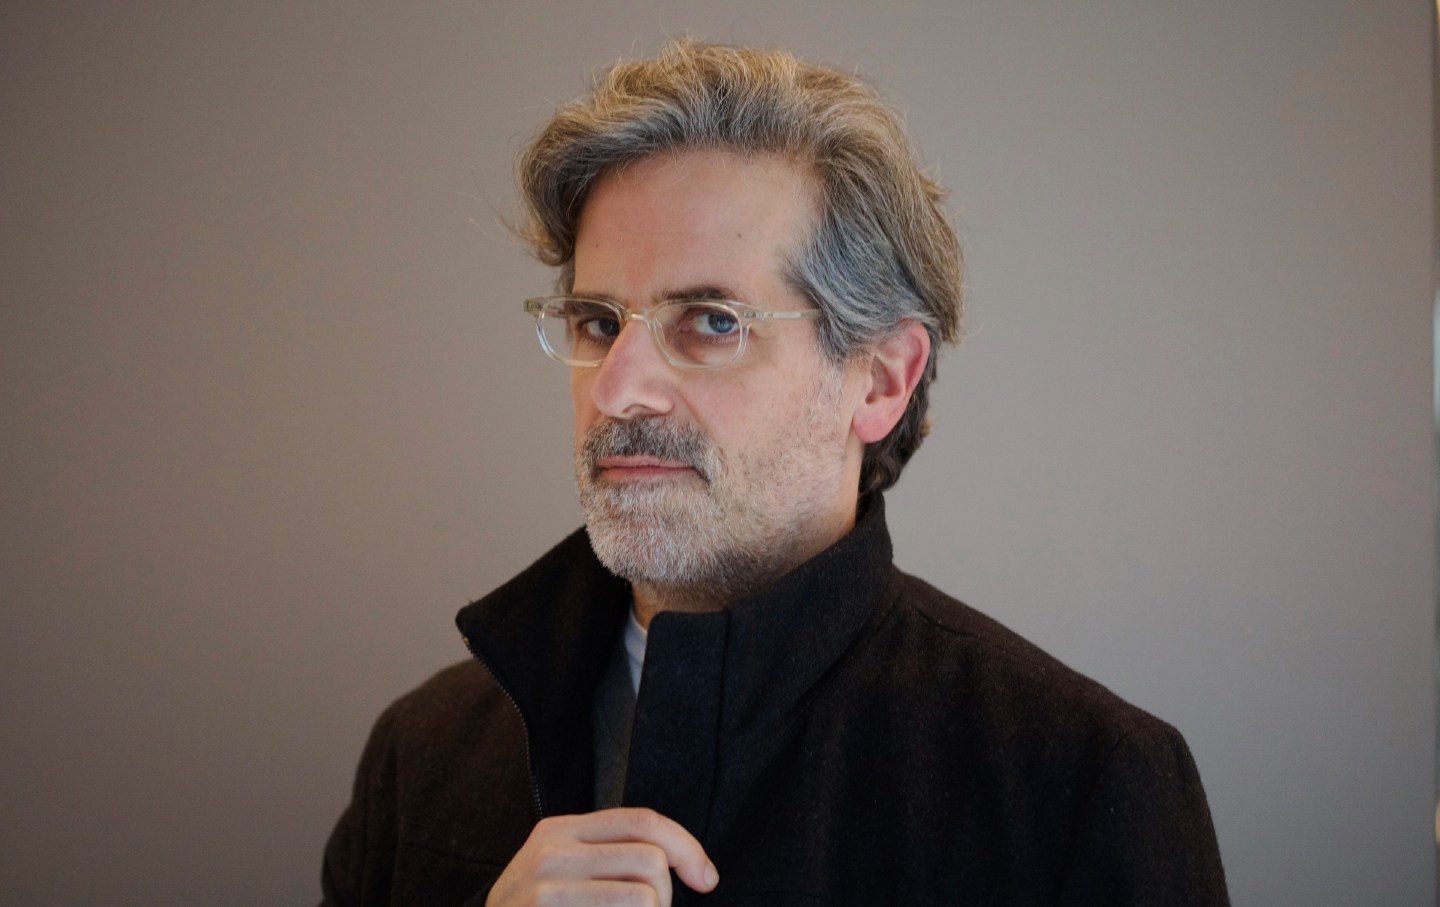 Writer Jonathan Lethem poses for a photo against a gray background